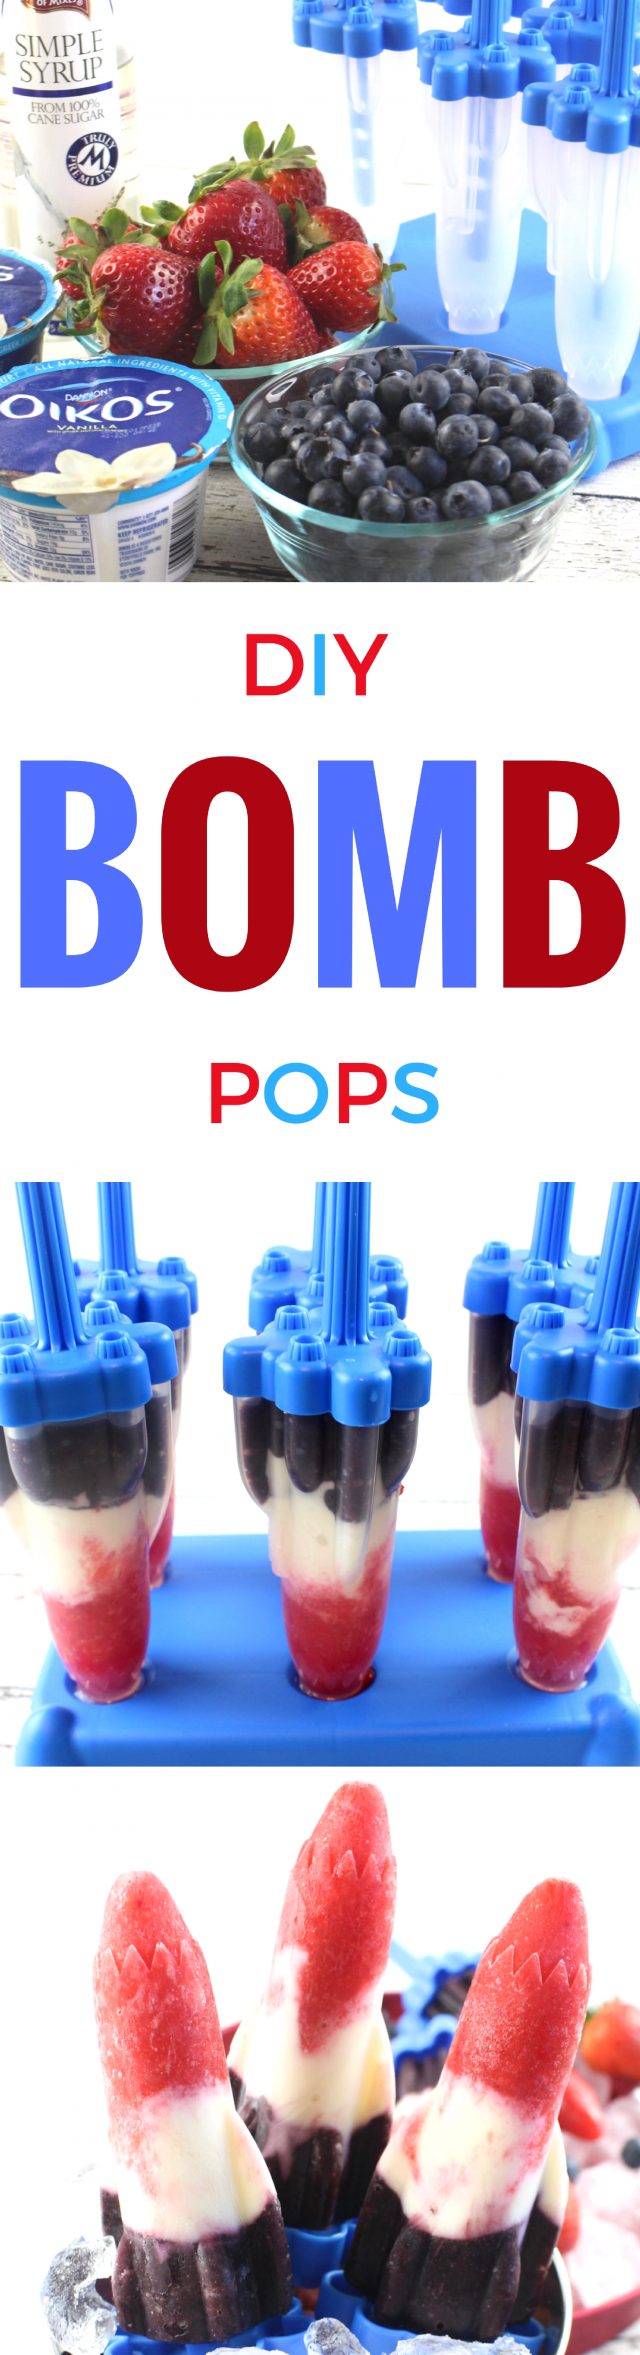 July 4th Red, White & Blue Fruit and Yogurt Bomb Pops Recipe Let's cool off this summer by starting off with these delicious red, white, and blue Patriotic Fruit and Yogurt Bomb Pops that are just perfect for a July 4th popsicle recipe, too! Filled with fruit and yogurt, these bomb pops are also easy on the waistline and OH SO refreshing on a hot day. 